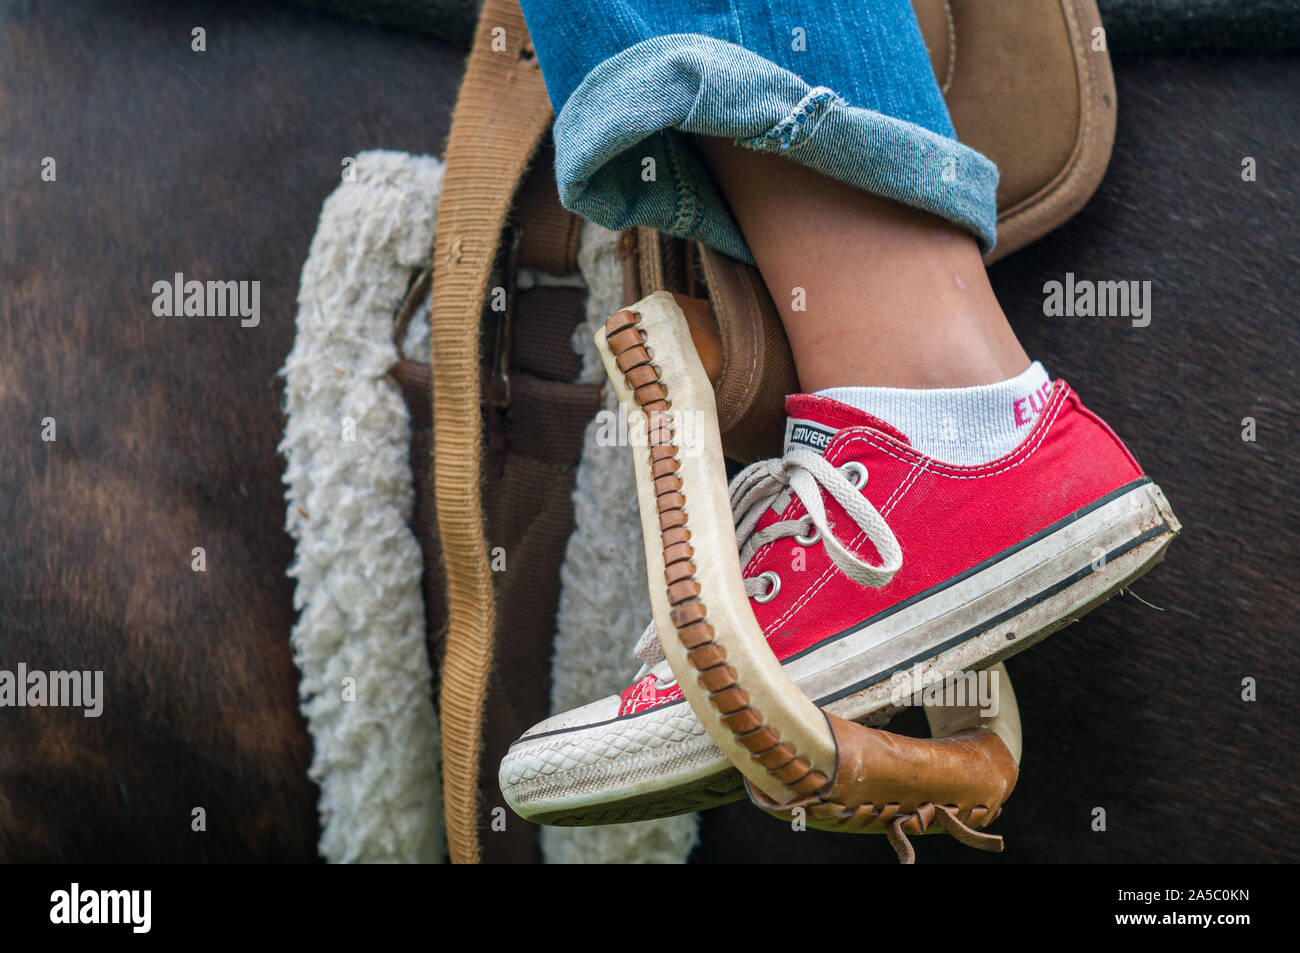 Girl's foot wearing iconic sneaker in horse stirrup. Stock Photo